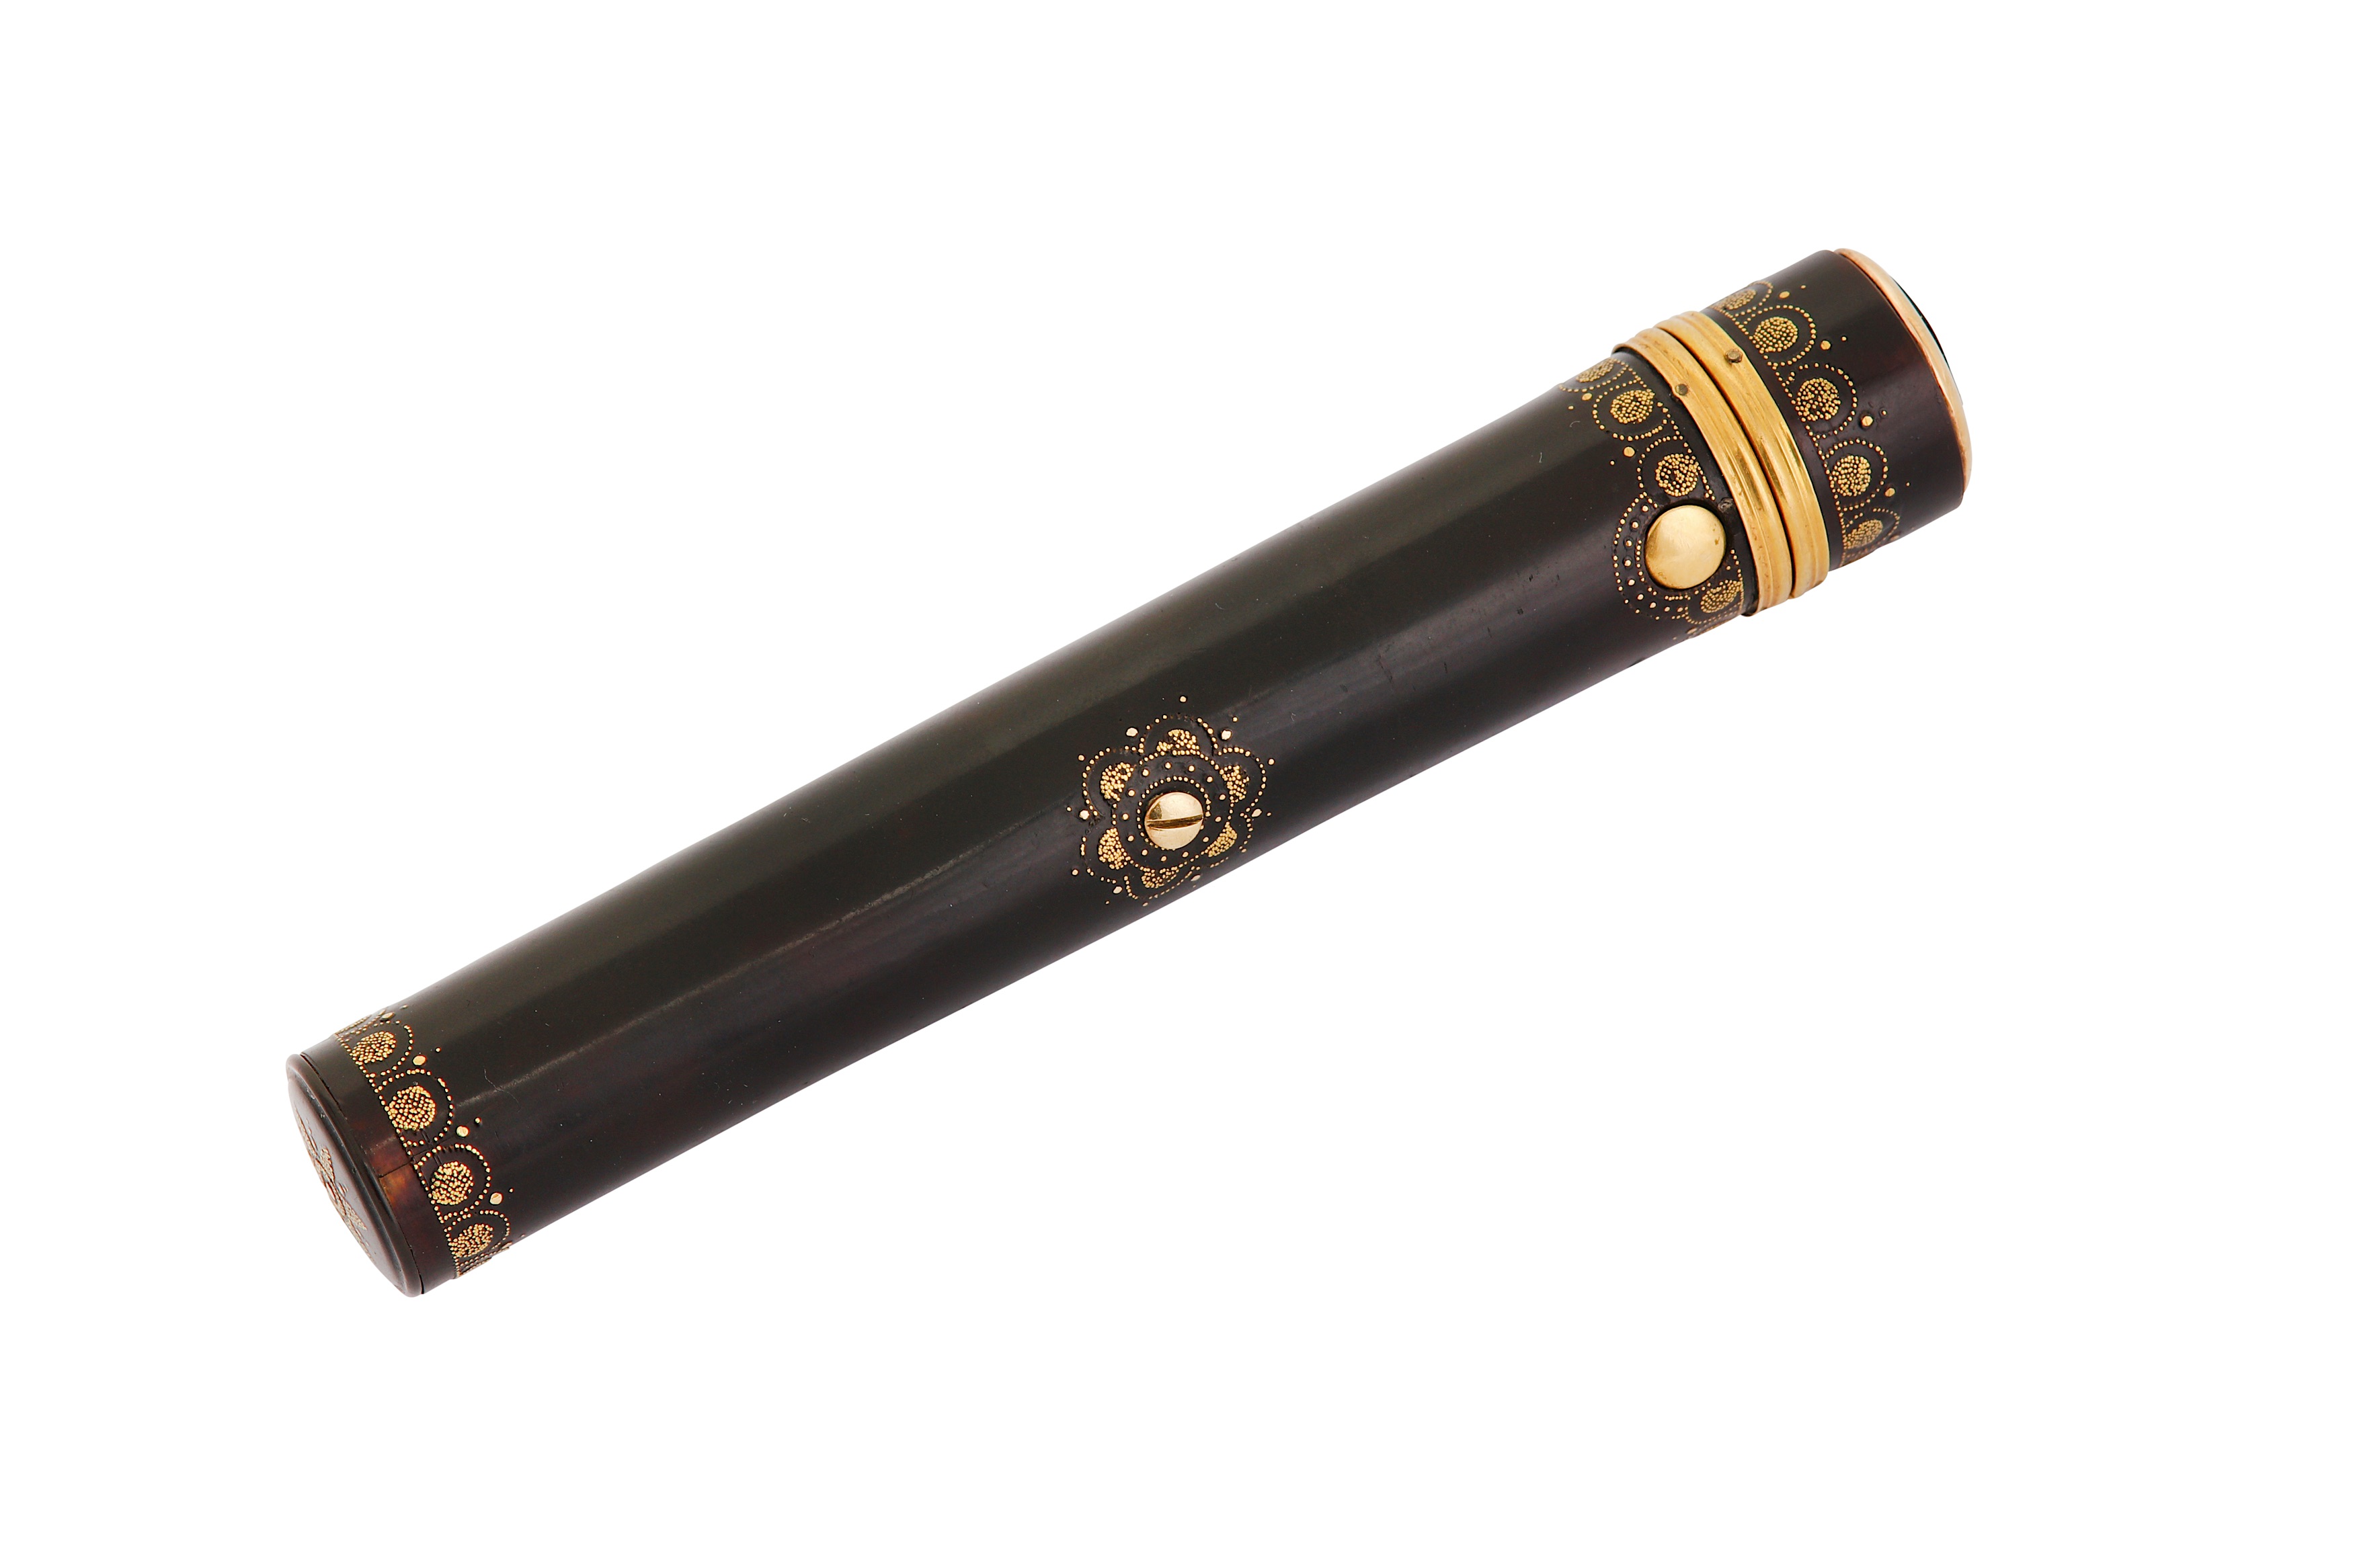 A mid to late 18th century French tortoiseshell and gold pique needle / sealing wax case, circa